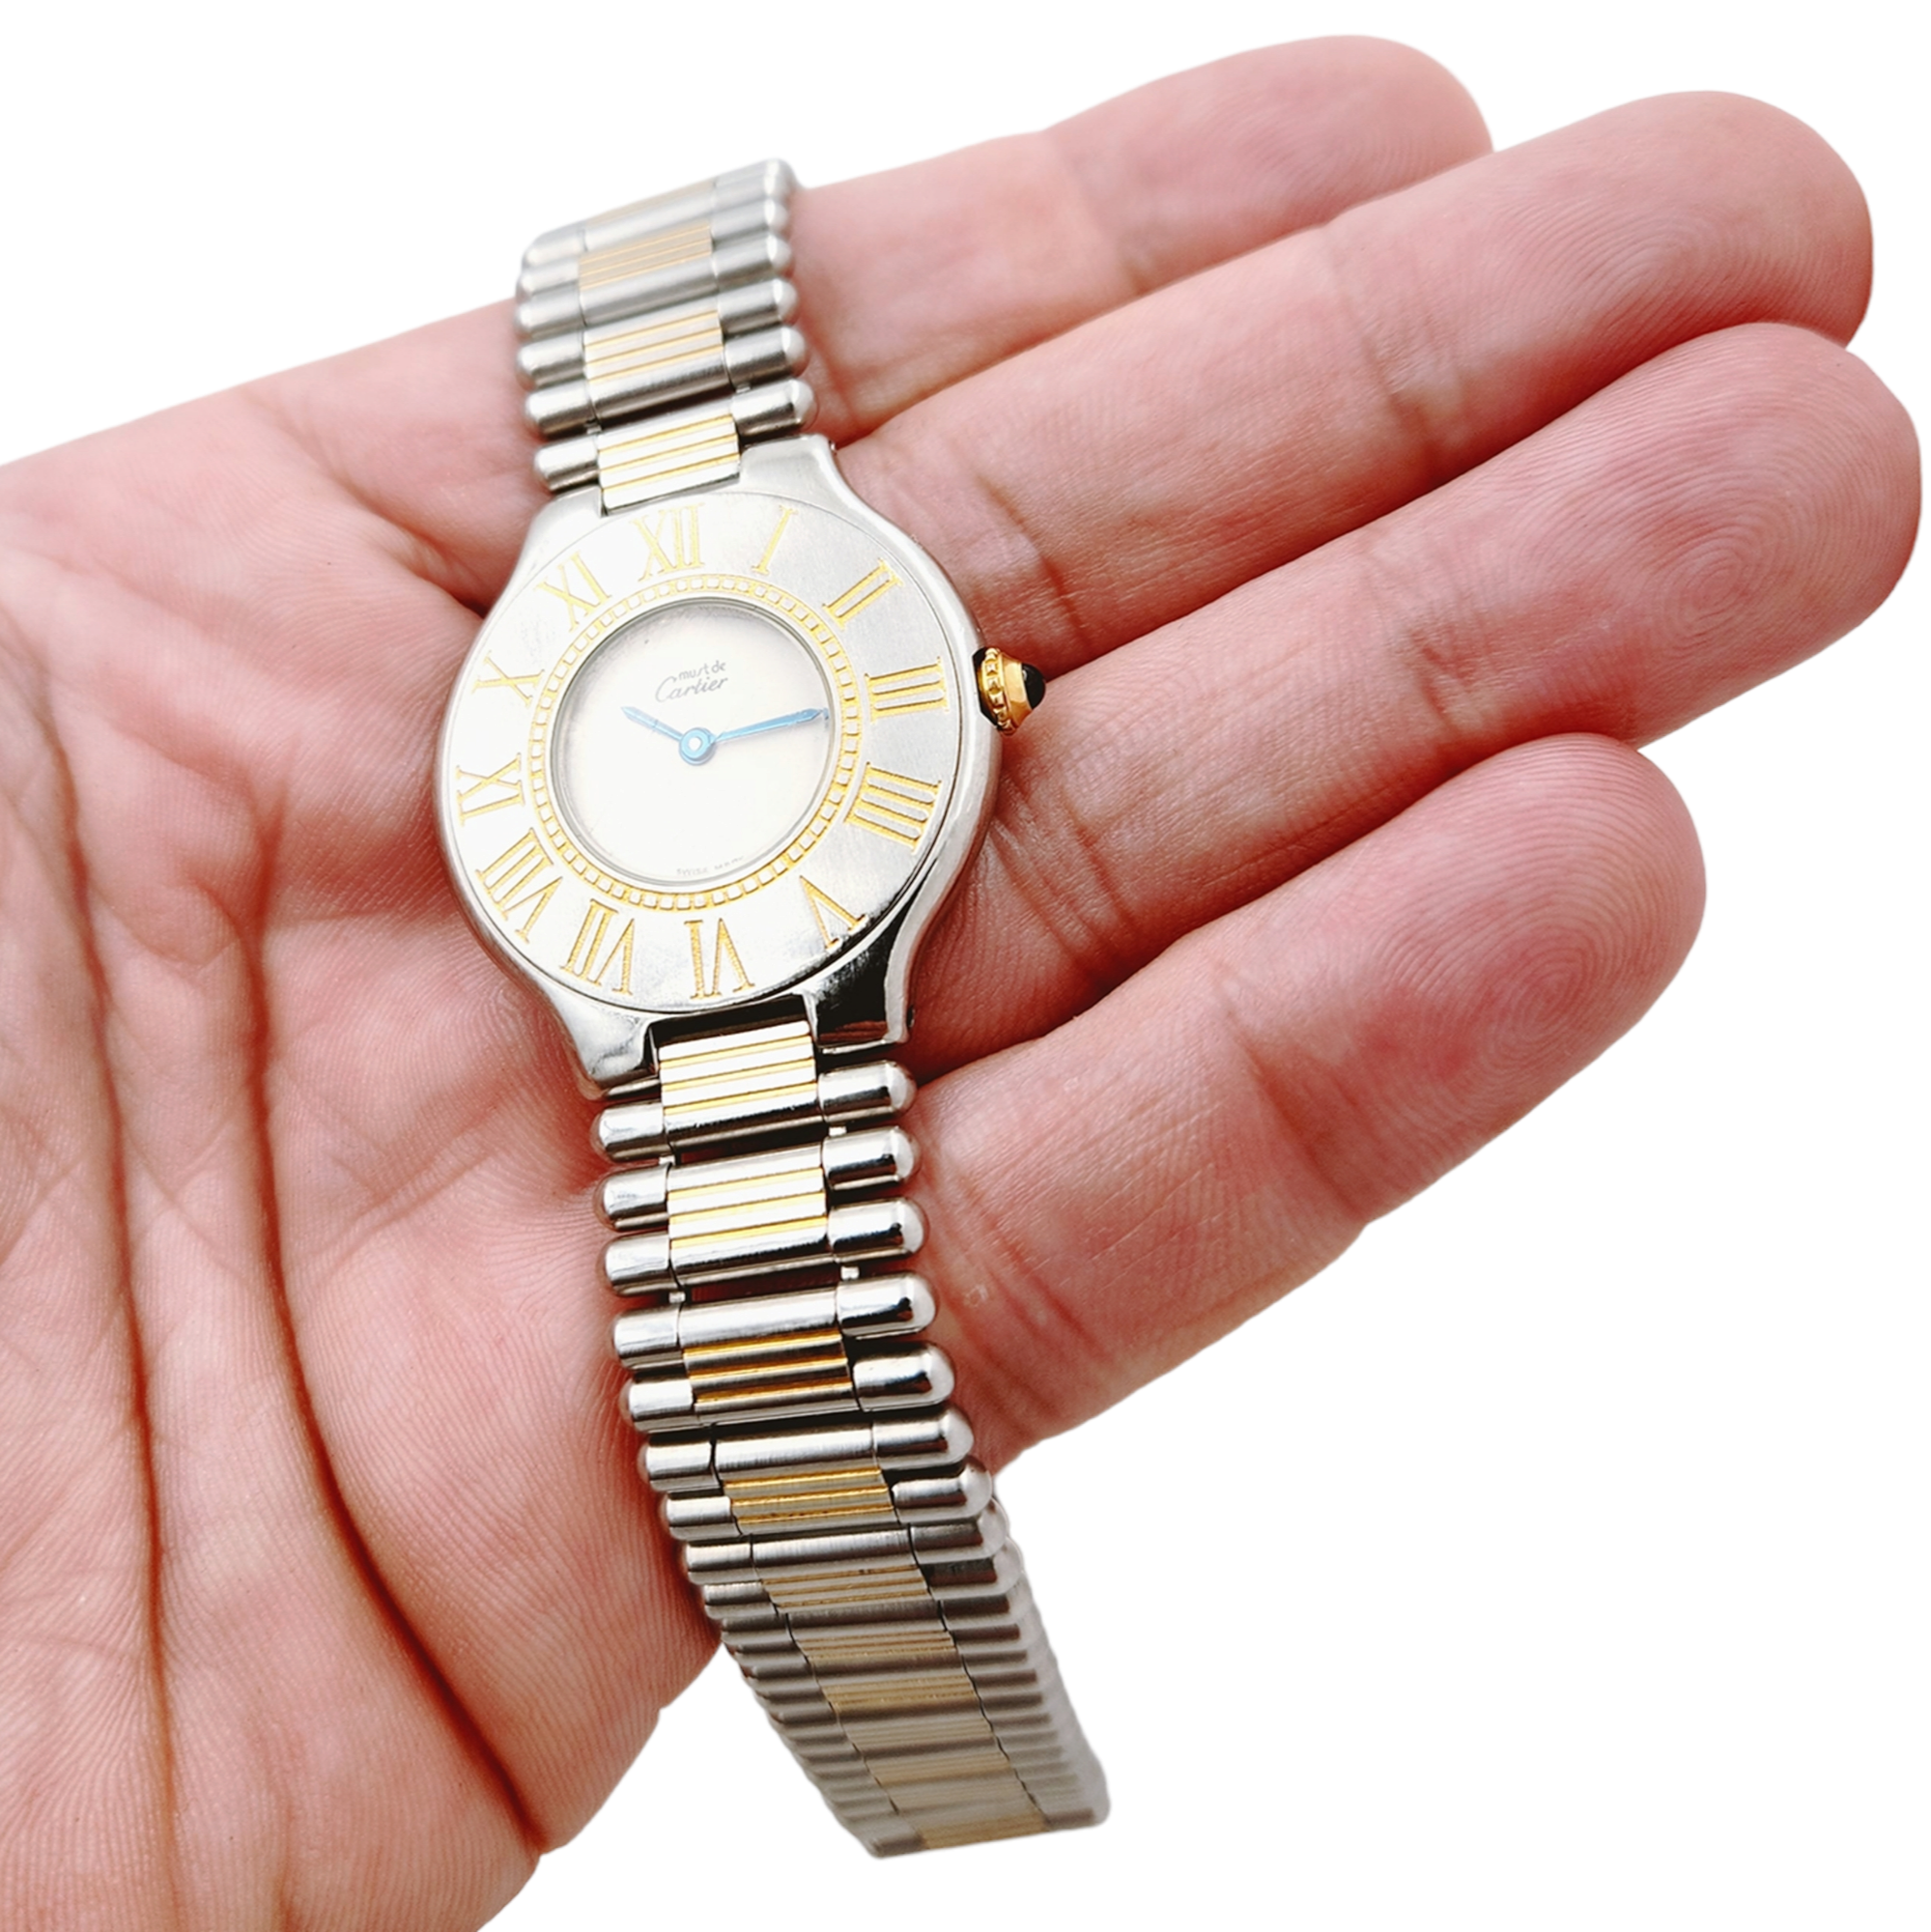 Ladies Cartier 31mm Must 21 Yellow Gold Stainless Steel Watch with White Dial. (Pre-Owned)